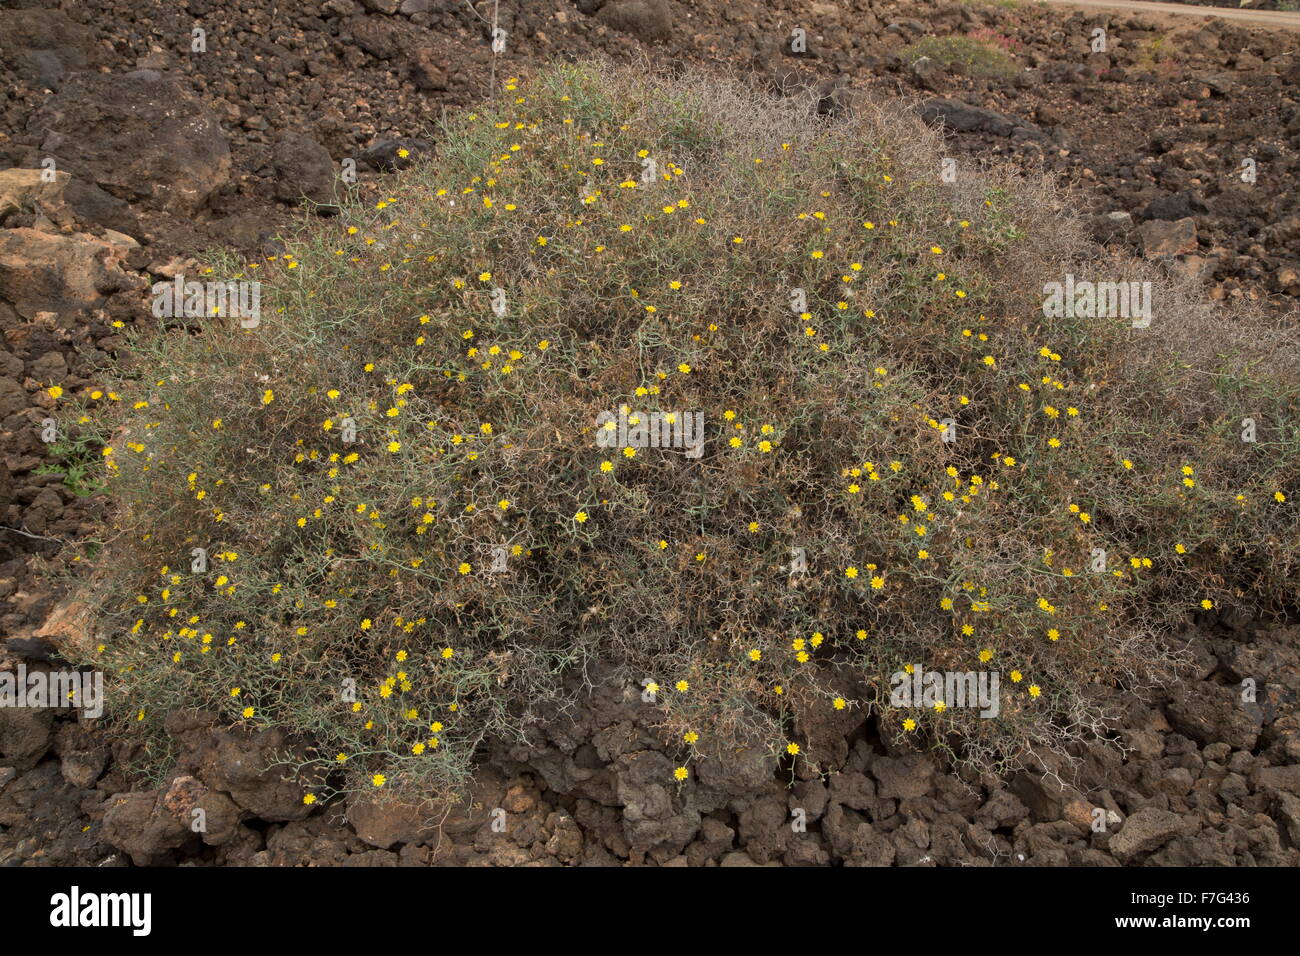 A spiny yellow composite, Launaea arborescens, growing on dry hillsides. Spain. Stock Photo